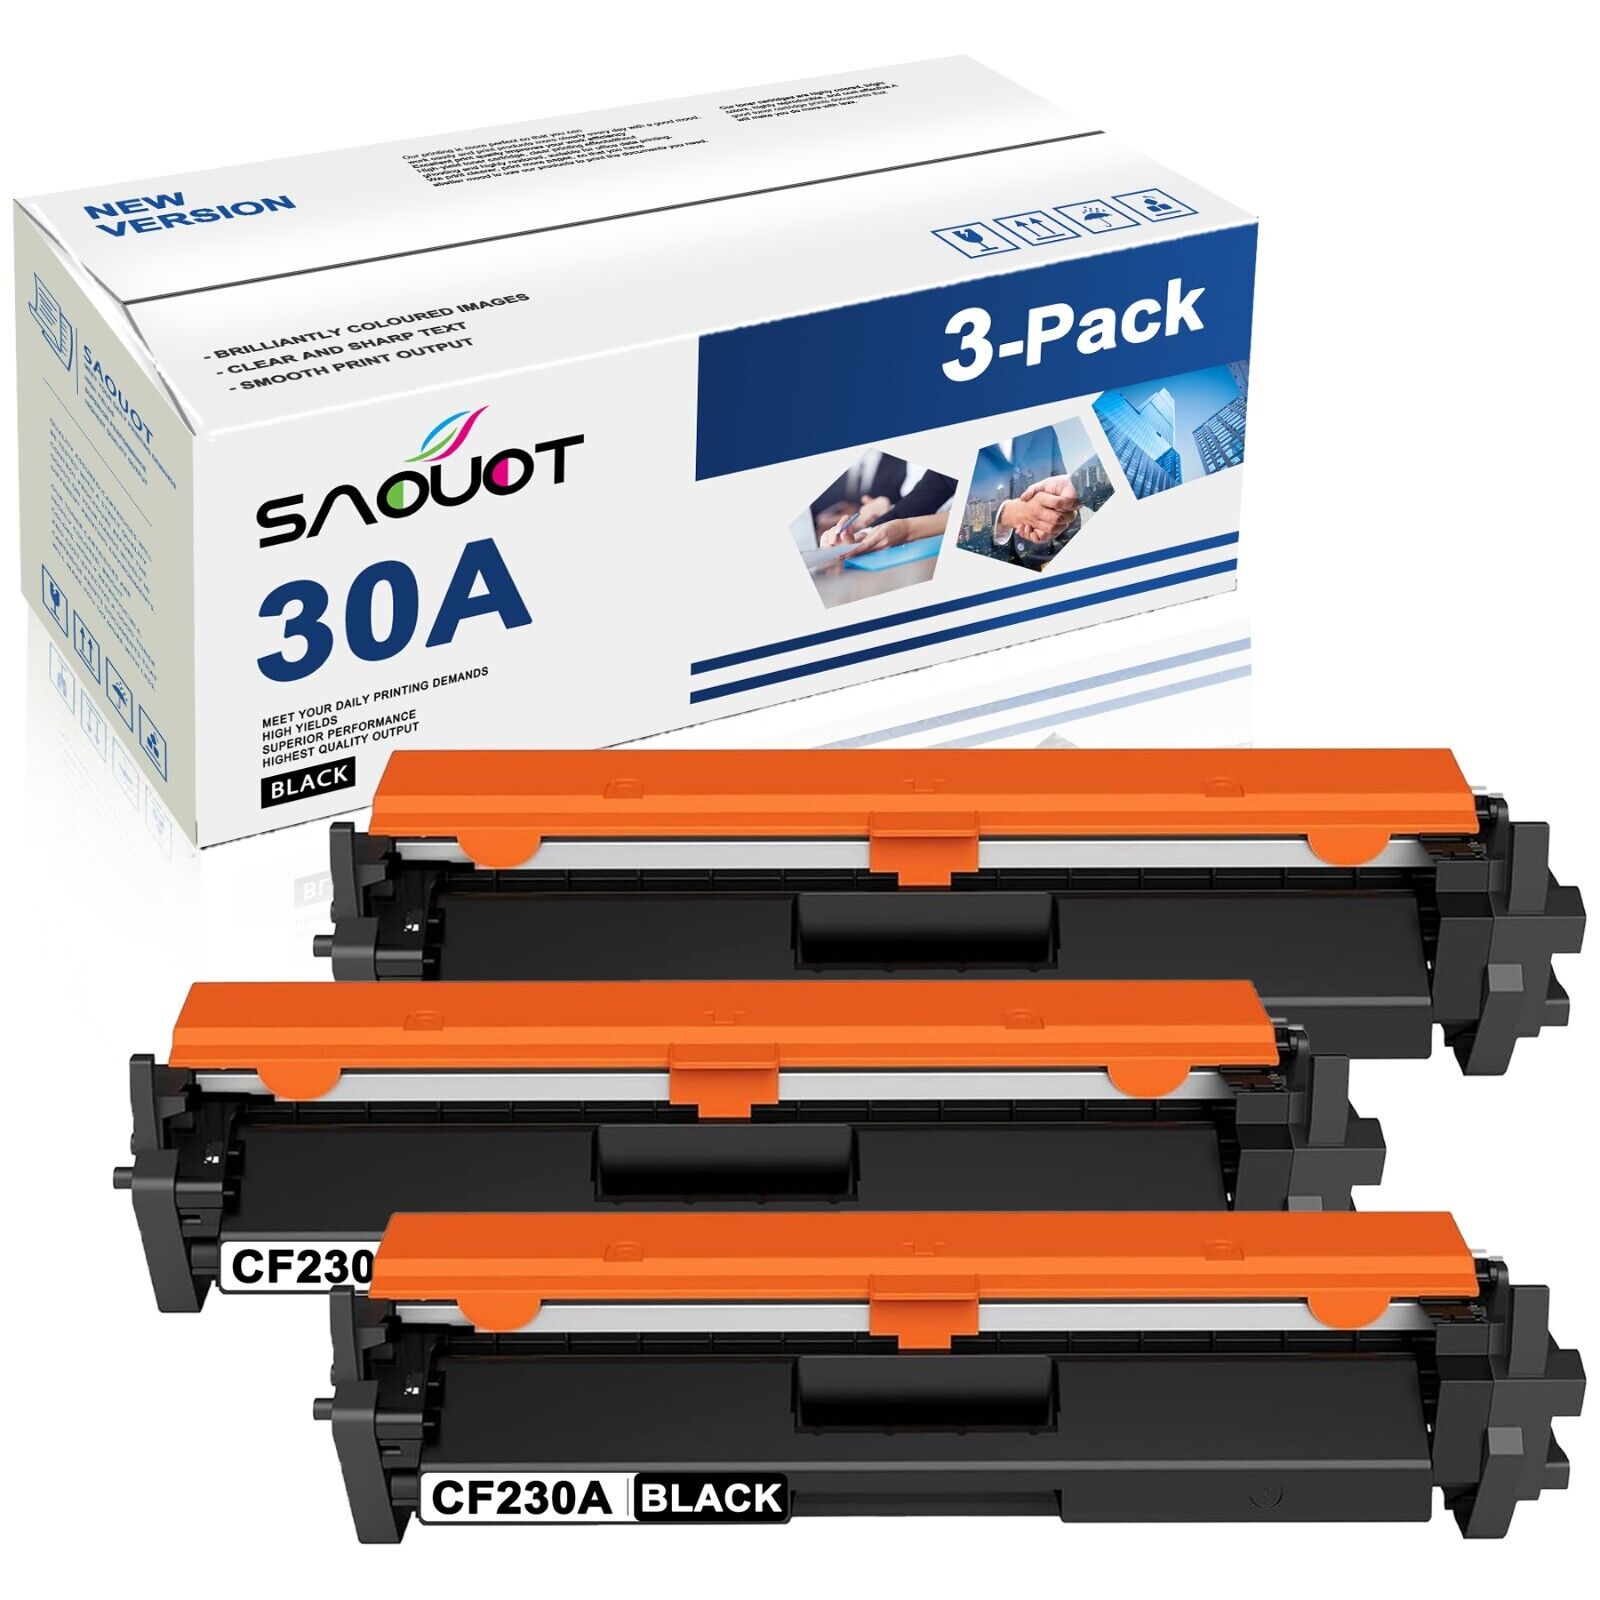 30A Brand New Toner CF230A Cartridge Replacement for HP Black Pro M203dw M203dn